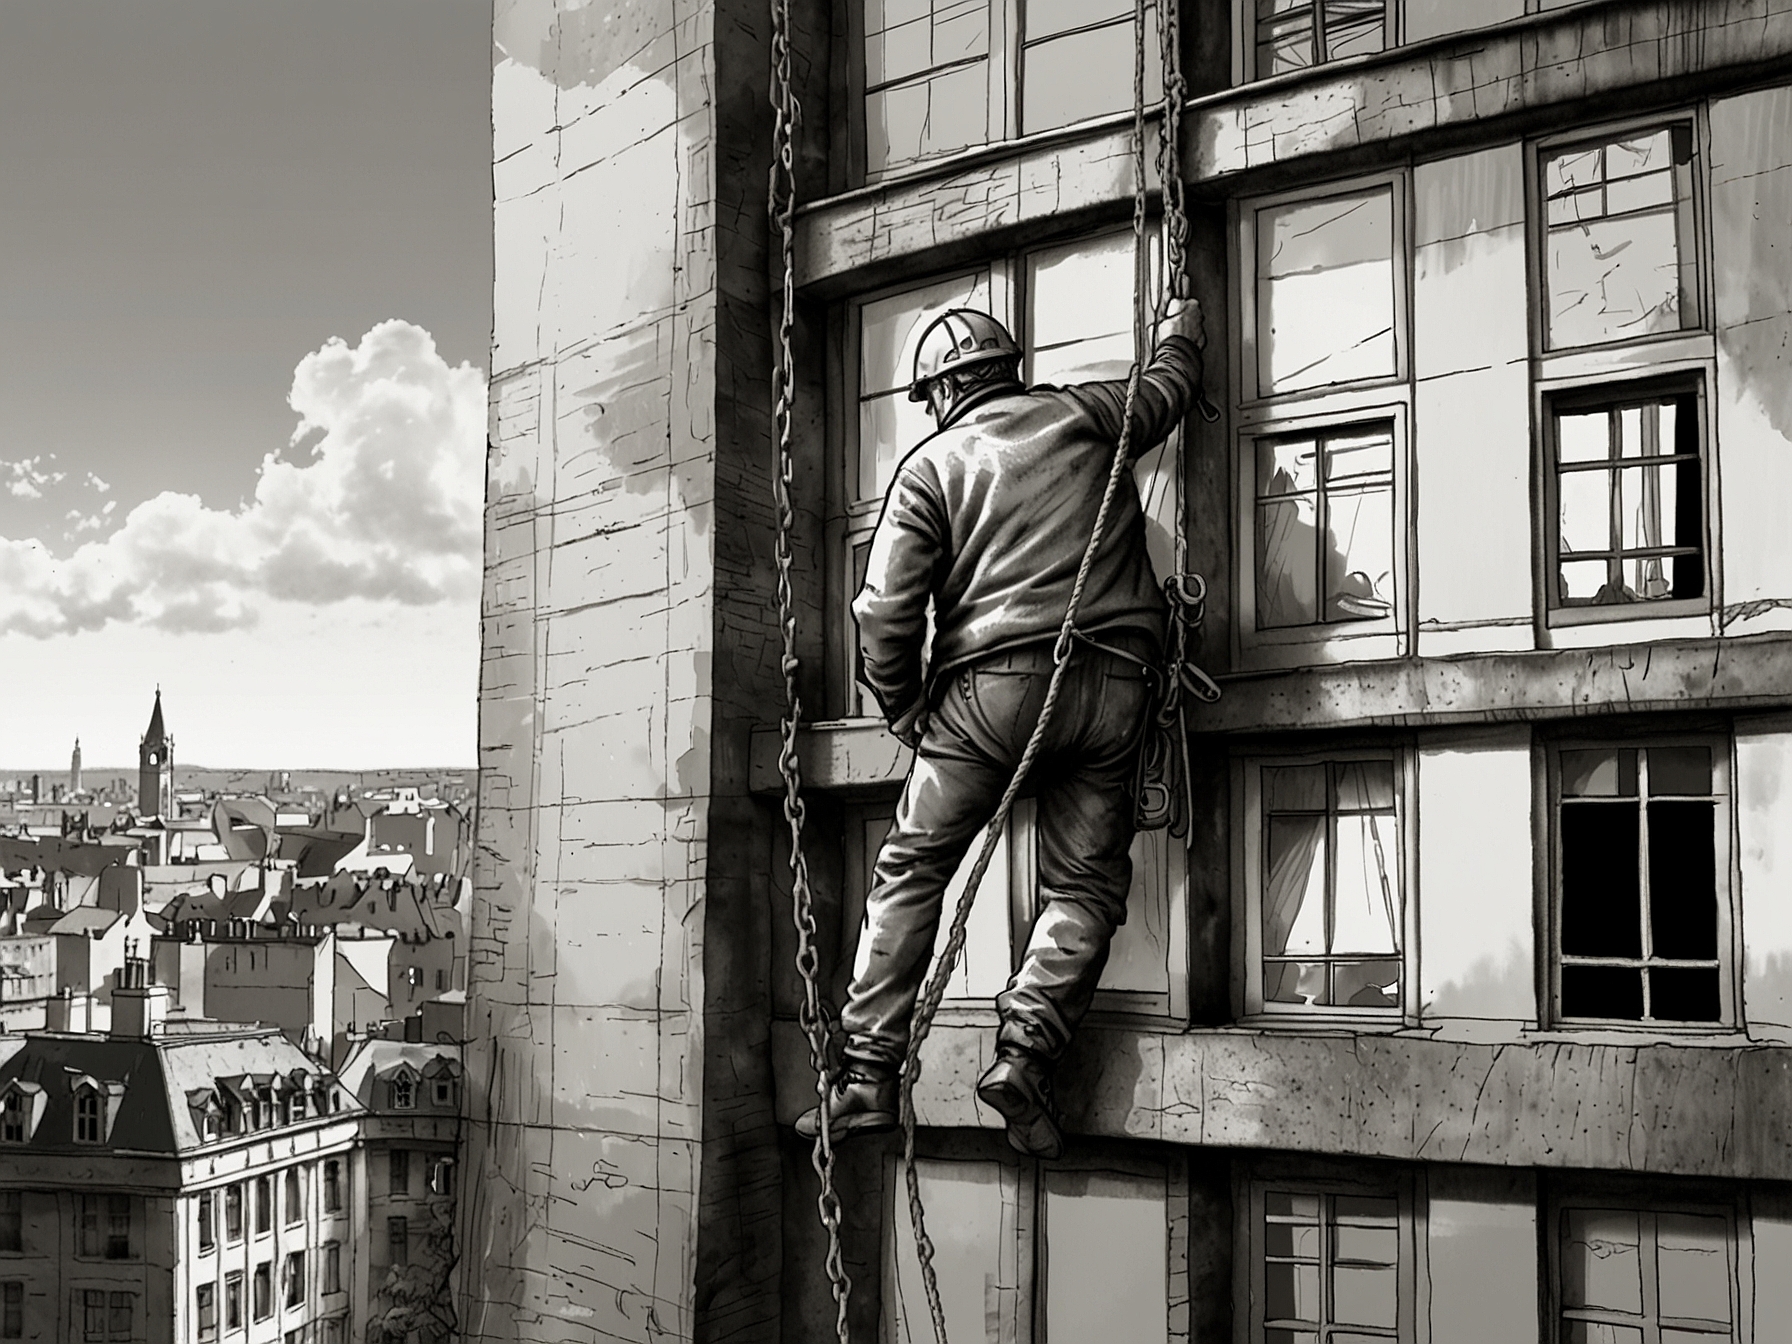 Ed Davey abseiling down a building as part of an urban renewal initiative, reflecting the party's plans for revitalizing city areas and fostering economic growth.